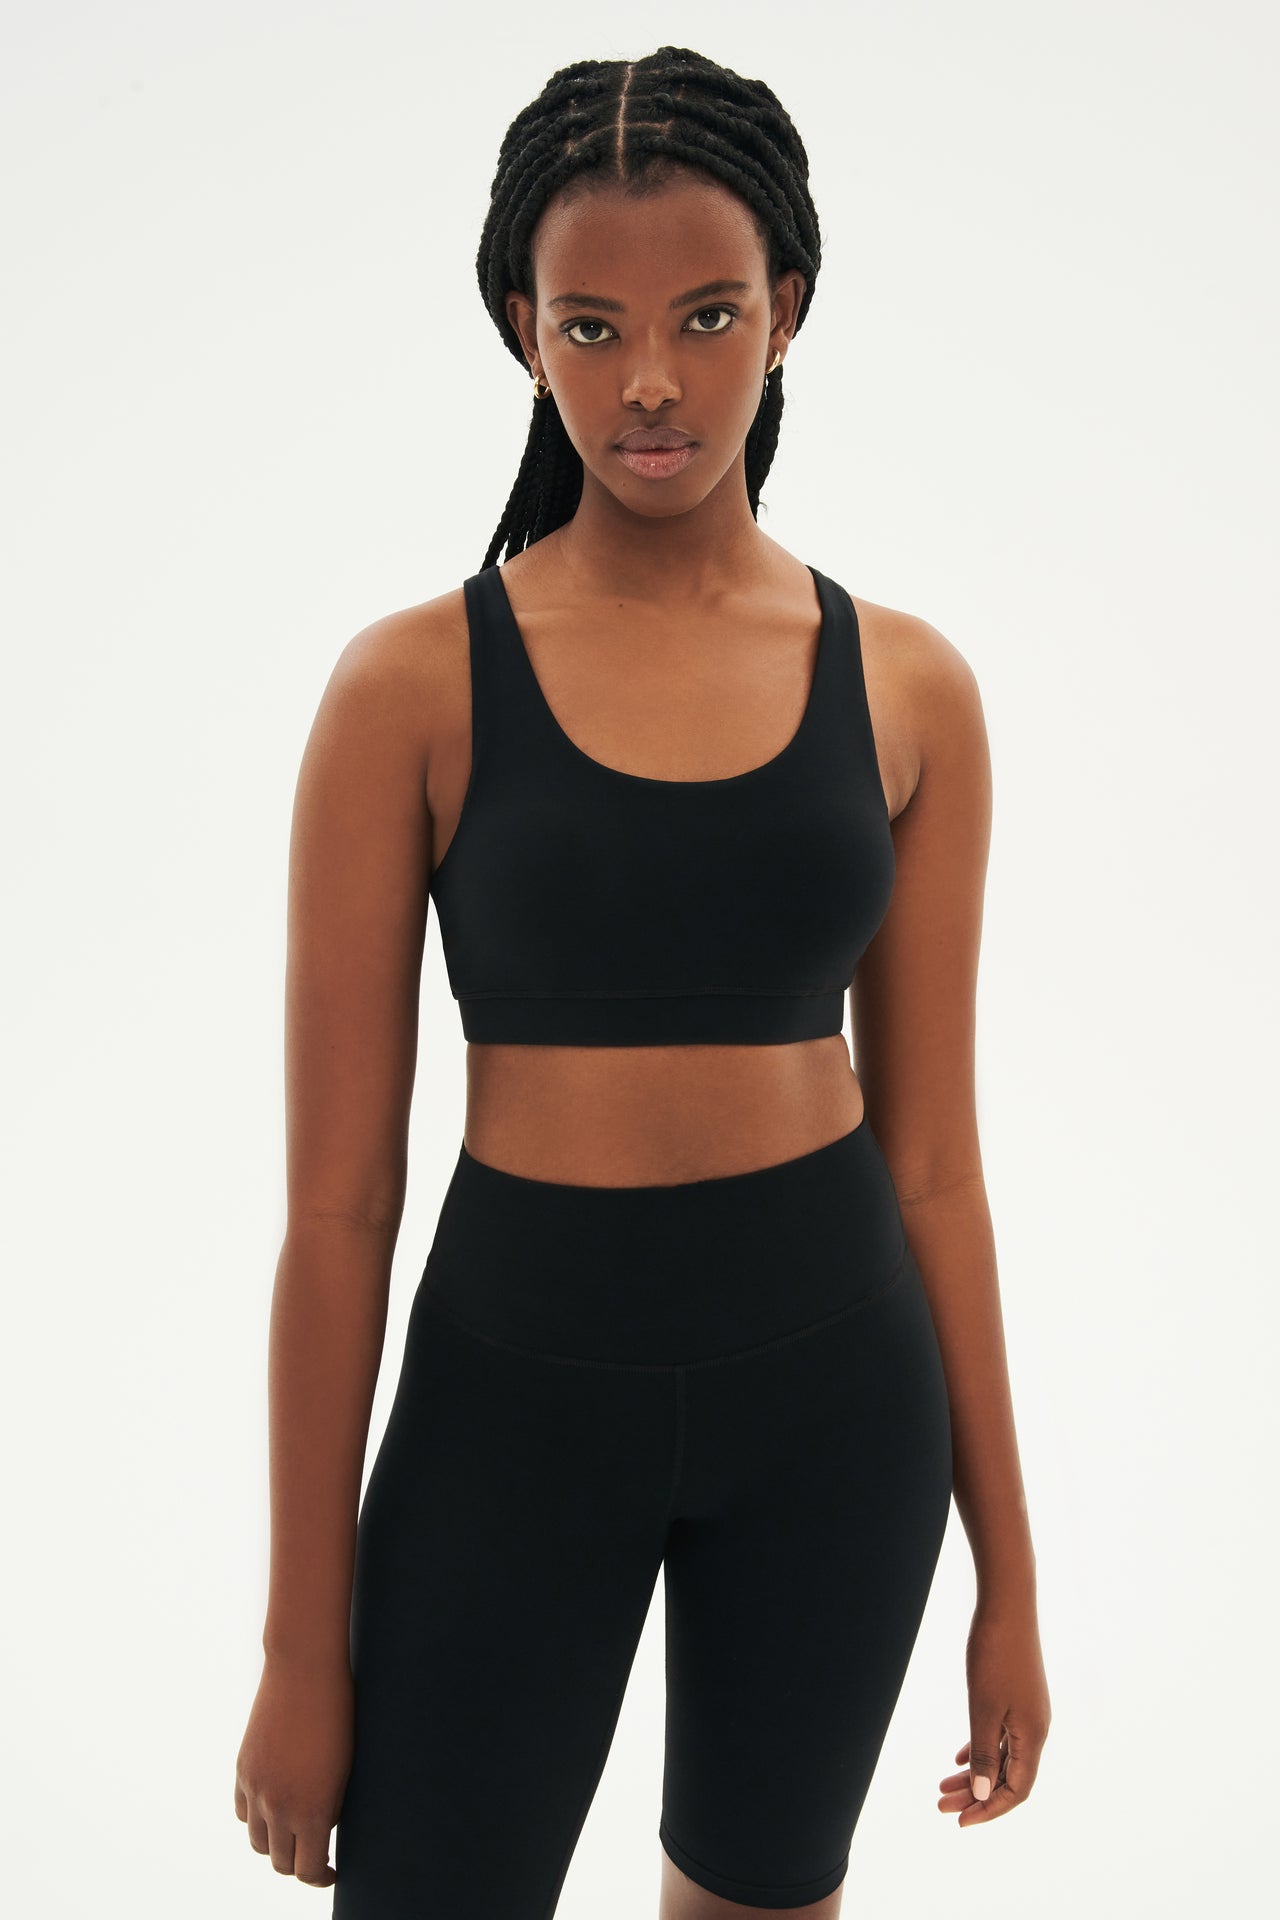 Front view of girl wearing black sports bra and black high waisted bike shorts